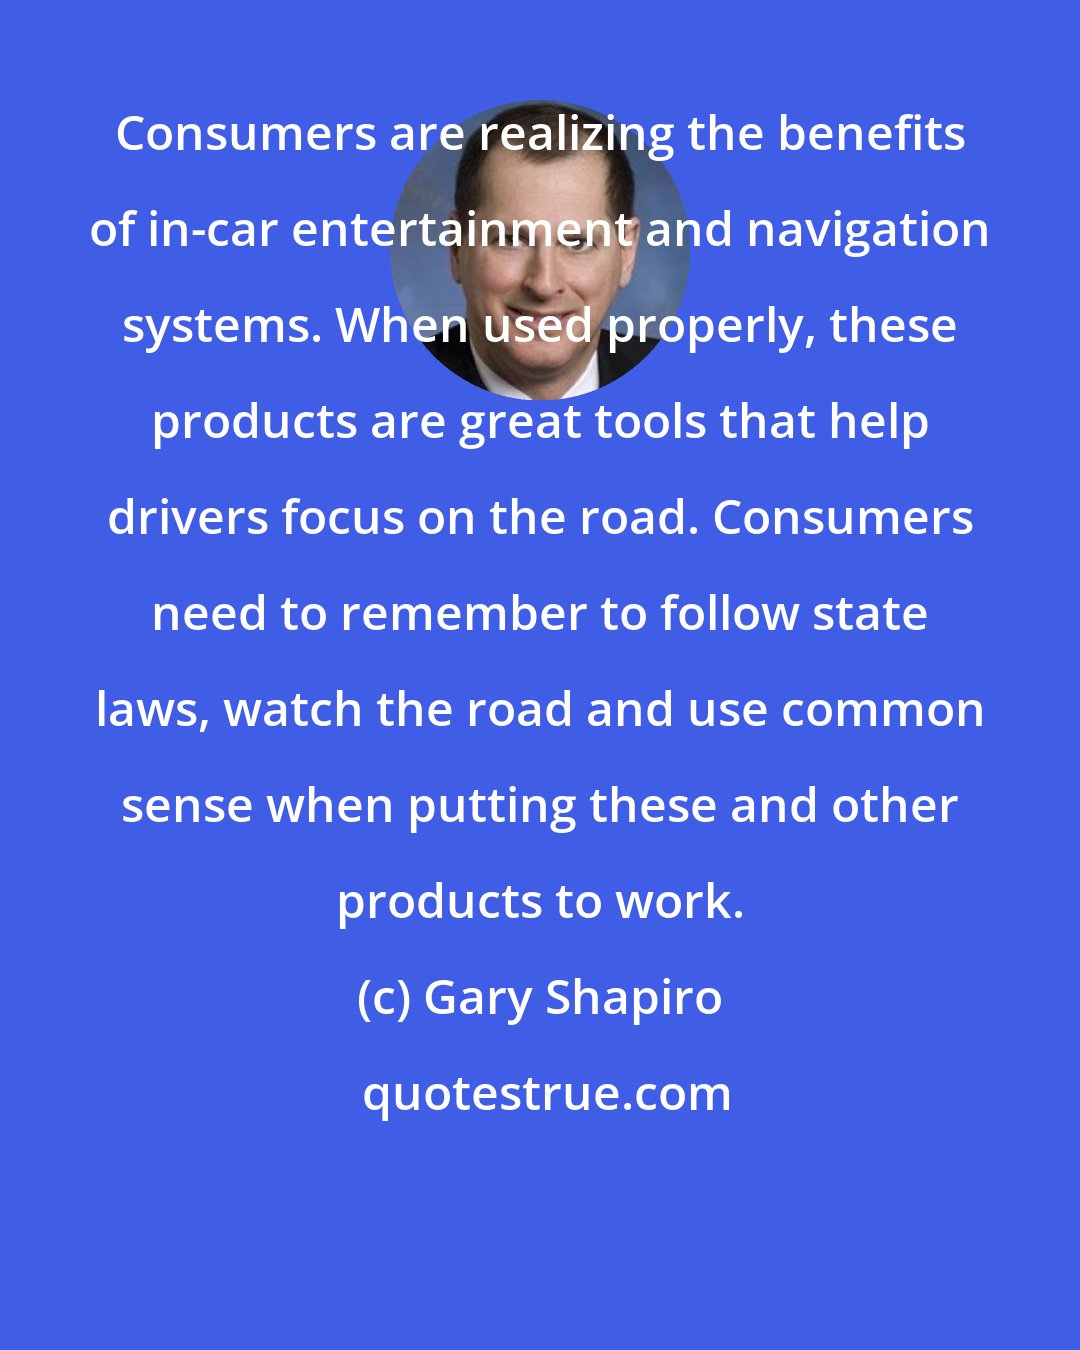 Gary Shapiro: Consumers are realizing the benefits of in-car entertainment and navigation systems. When used properly, these products are great tools that help drivers focus on the road. Consumers need to remember to follow state laws, watch the road and use common sense when putting these and other products to work.